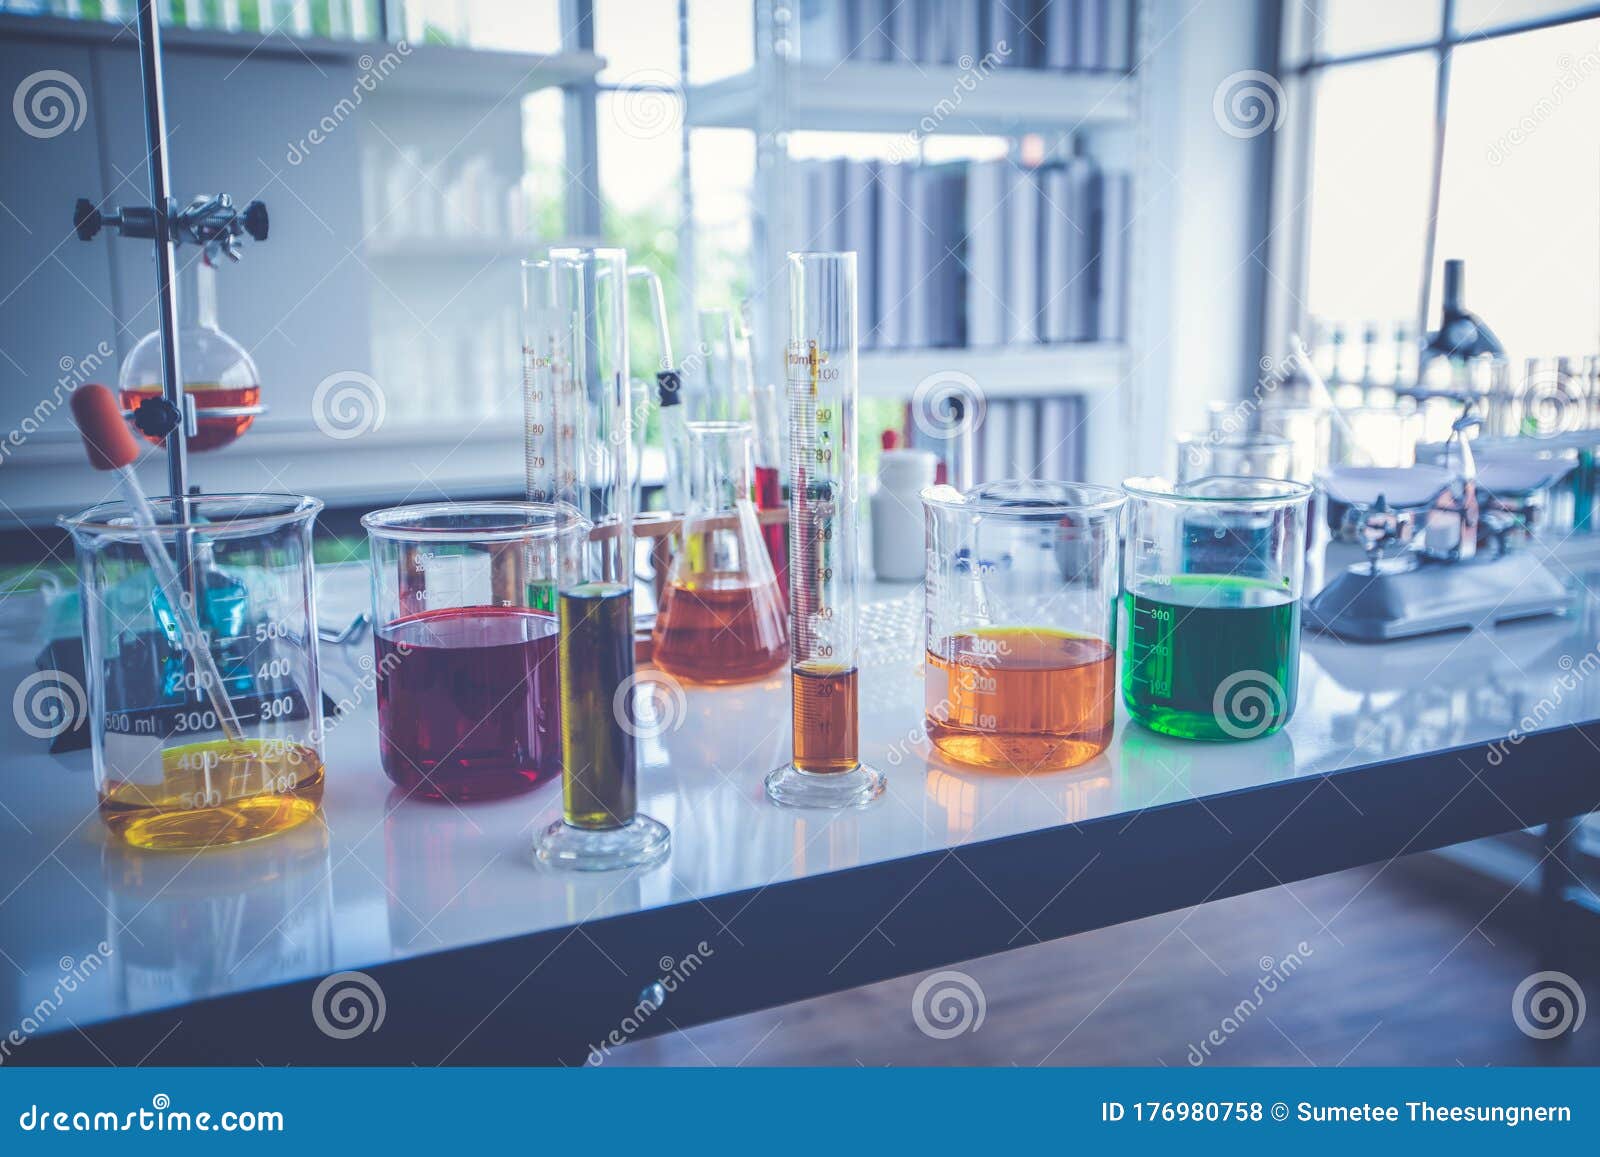 Medical or Chemical Laboratory Background. Laboratory Concept without  People Stock Photo - Image of medicine, test: 176980758